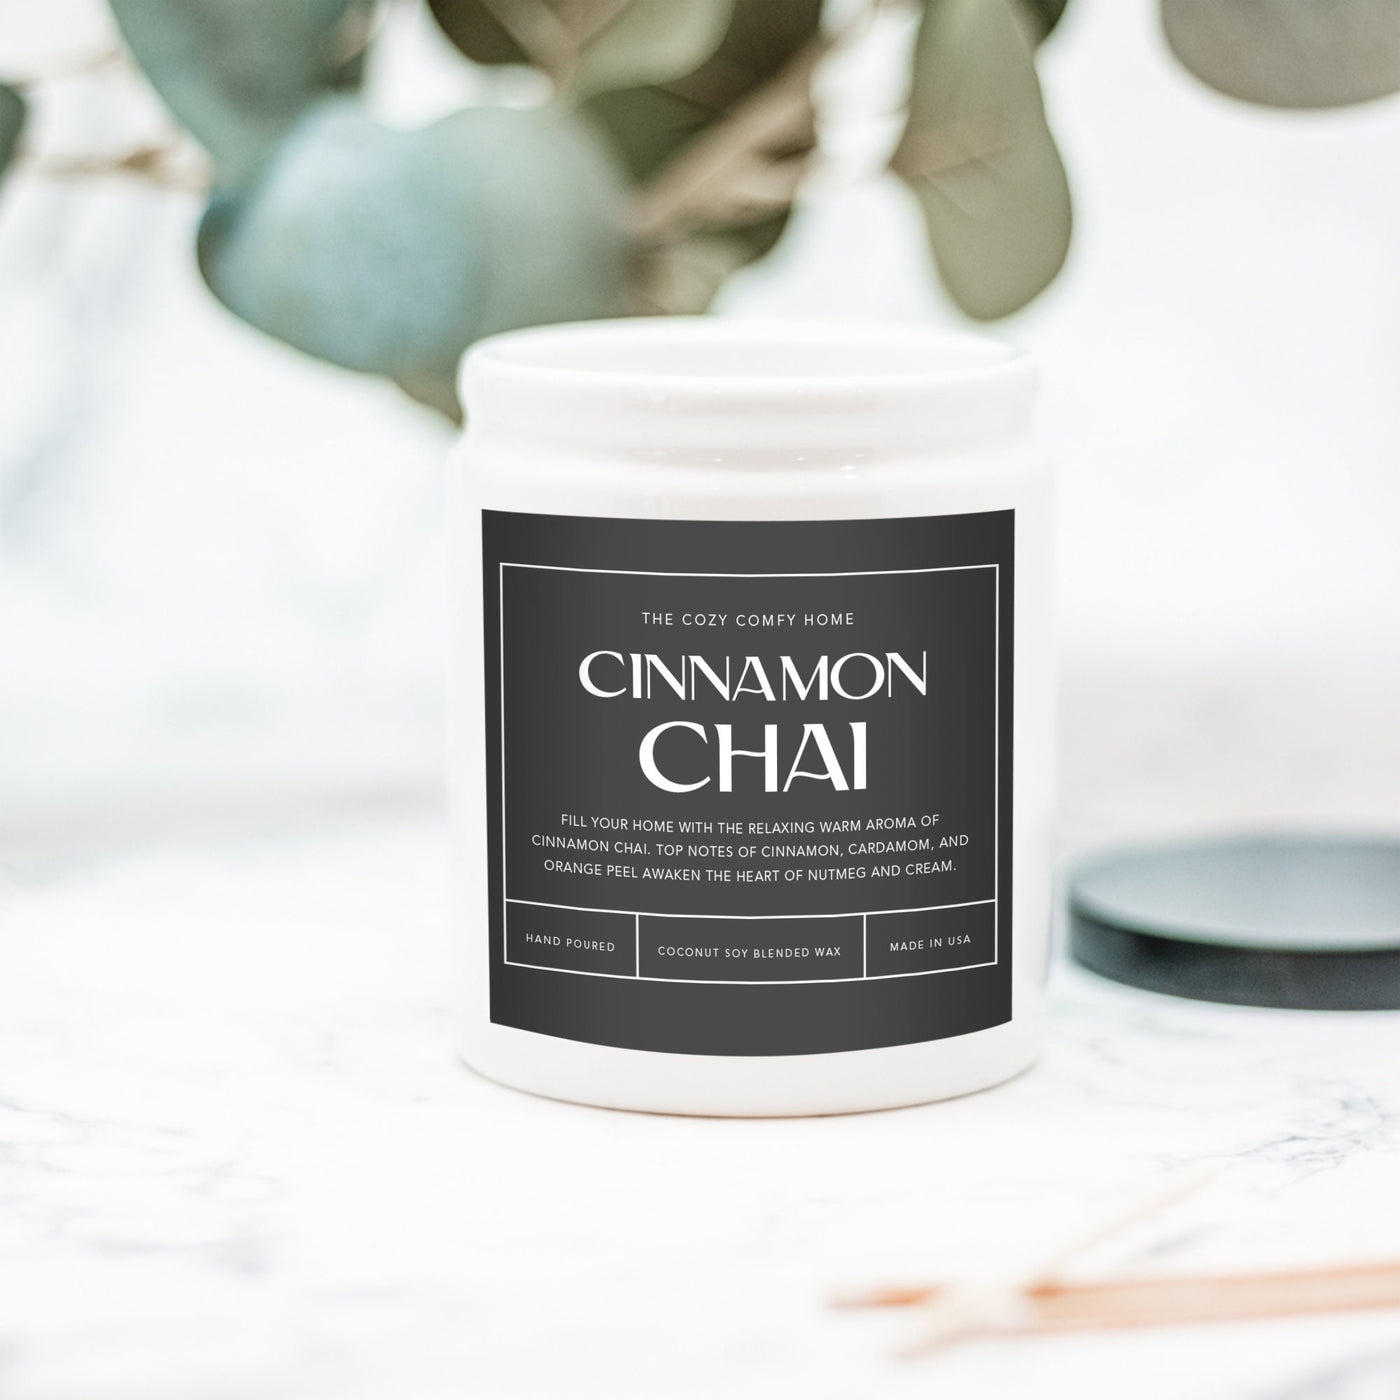 Cinnamon Chai hand poured candle, Scented Nontoxic Vegan Candle, 8 oz coconut soy wax tin candle, Black or White Ceramic Candle, Jar Candle